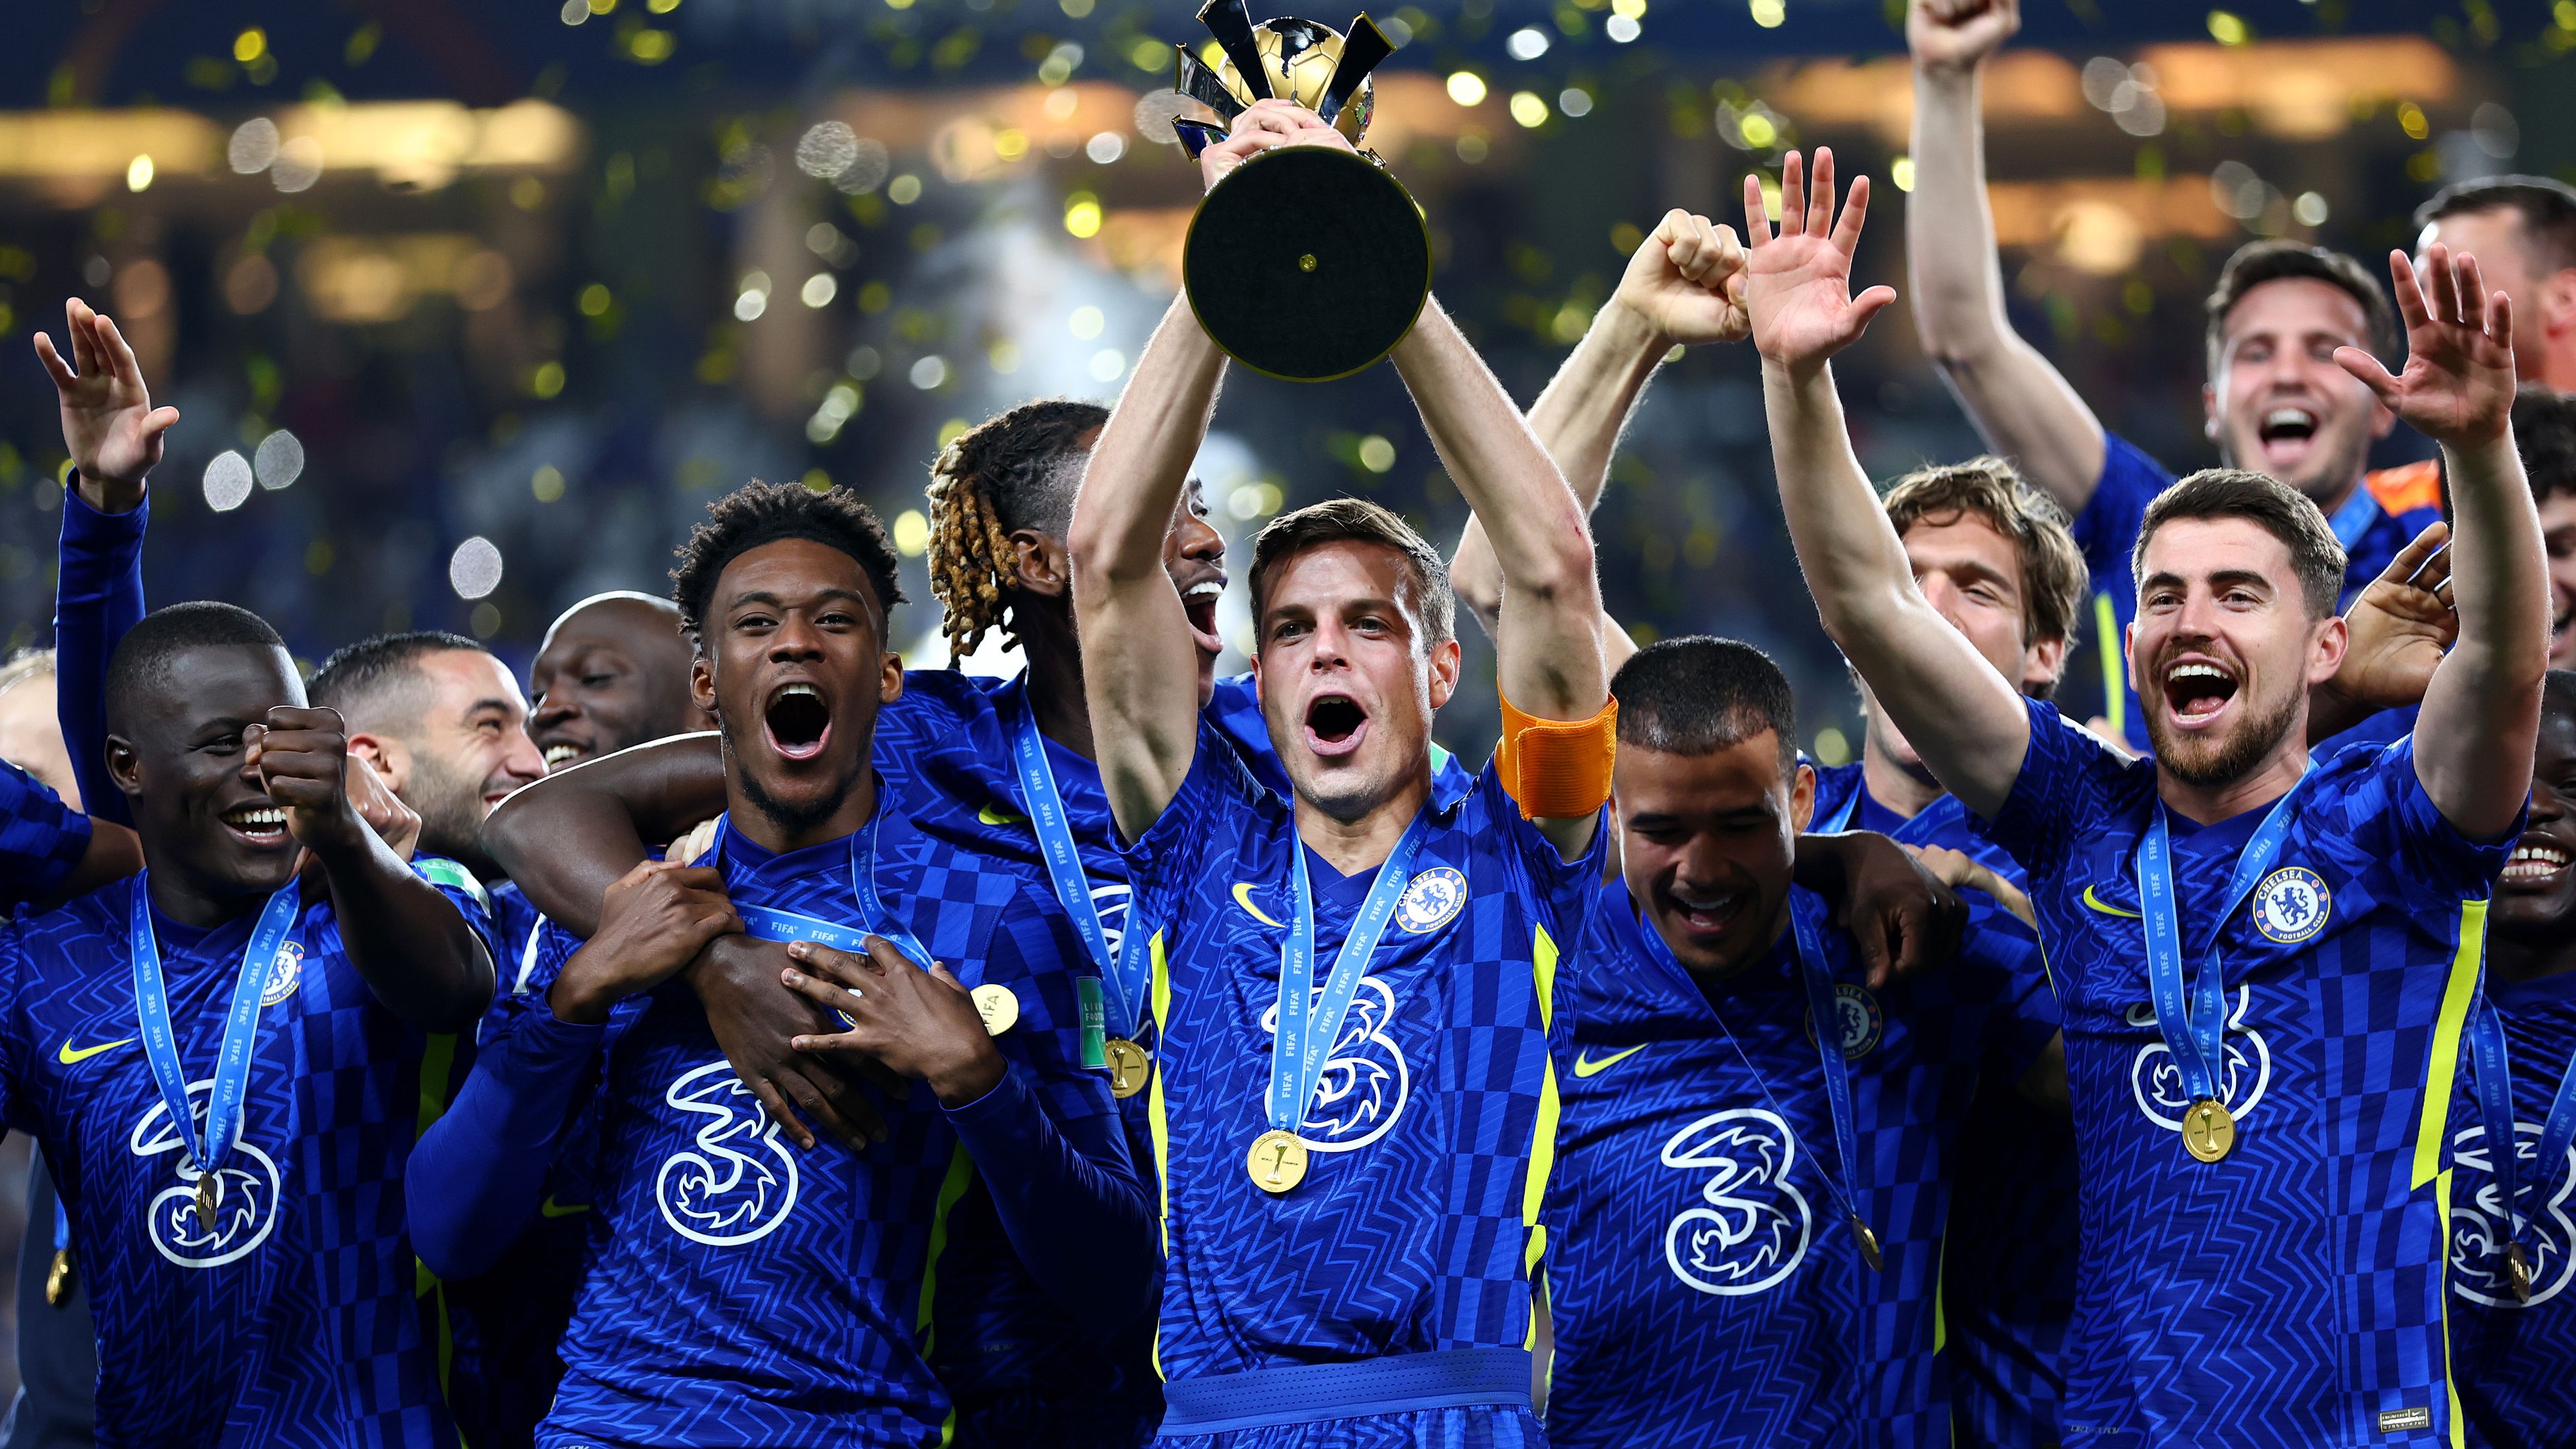 Cesar Azpilicueta of Chelsea lifts the FIFA Club World Cup trophy following victory in the FIFA Club World Cup UAE 2021 Final match between Chelsea and Palmeiras at Mohammed Bin Zayed Stadium.